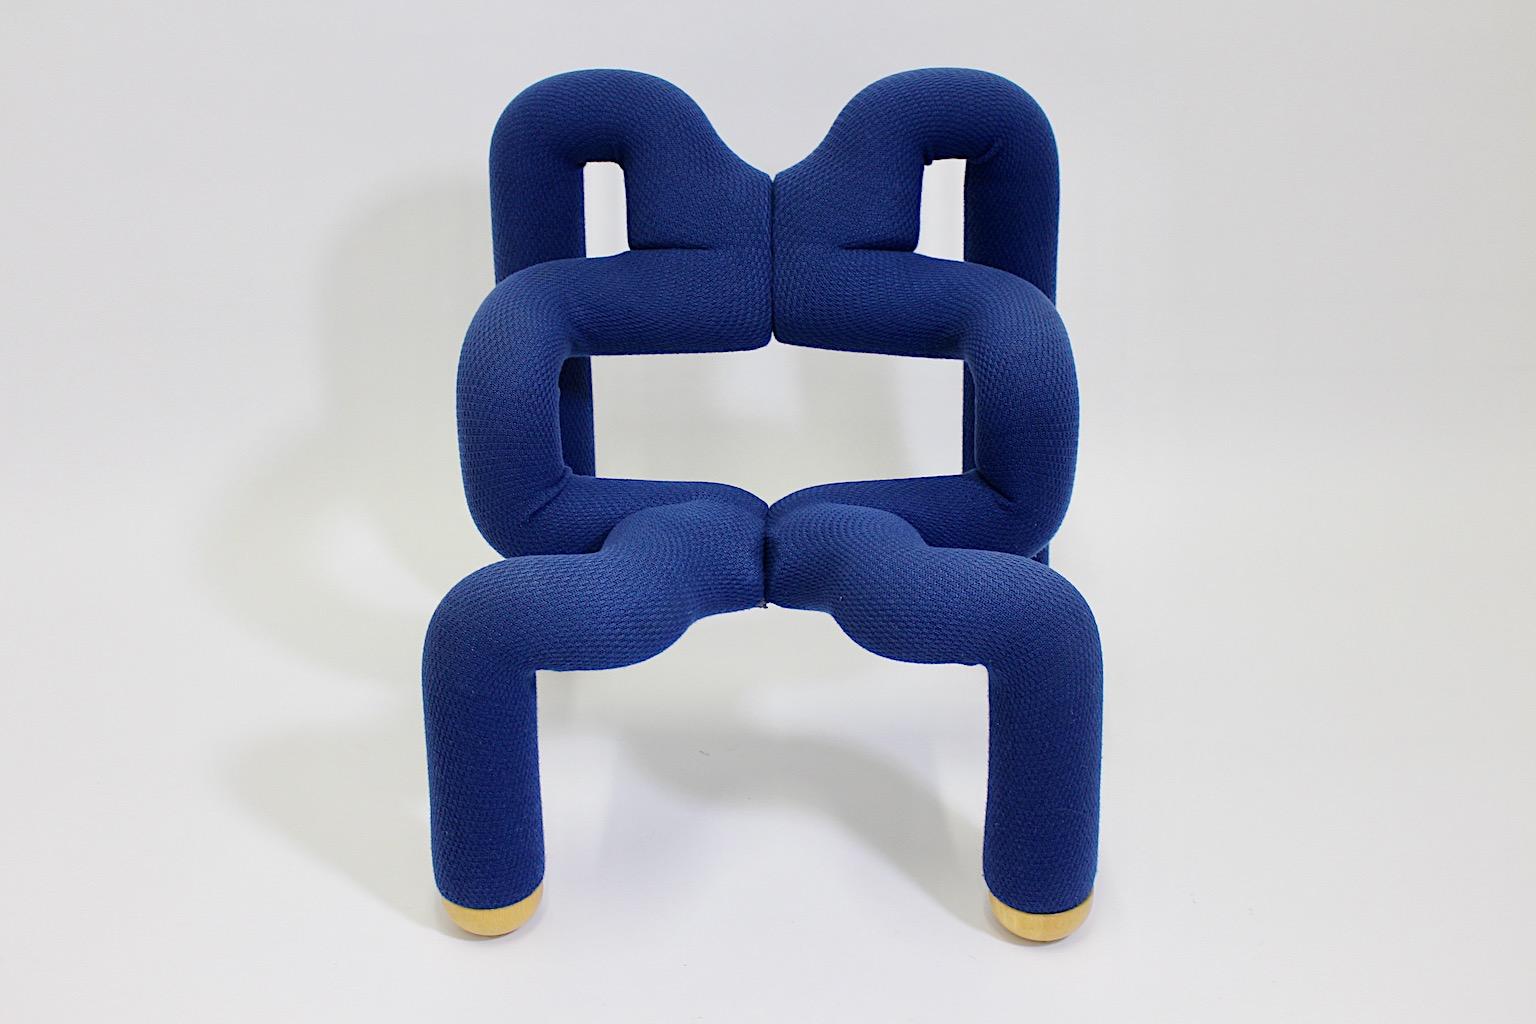 Blue vintage modernist lounge chair Ekstrem designed by Terje Ekstrom for Stokke.
An iconic and sculptural lounge chair with super ergonomic shape in beautiful blue color tone.
The lounge chair is made of a metal construction, which is covered with